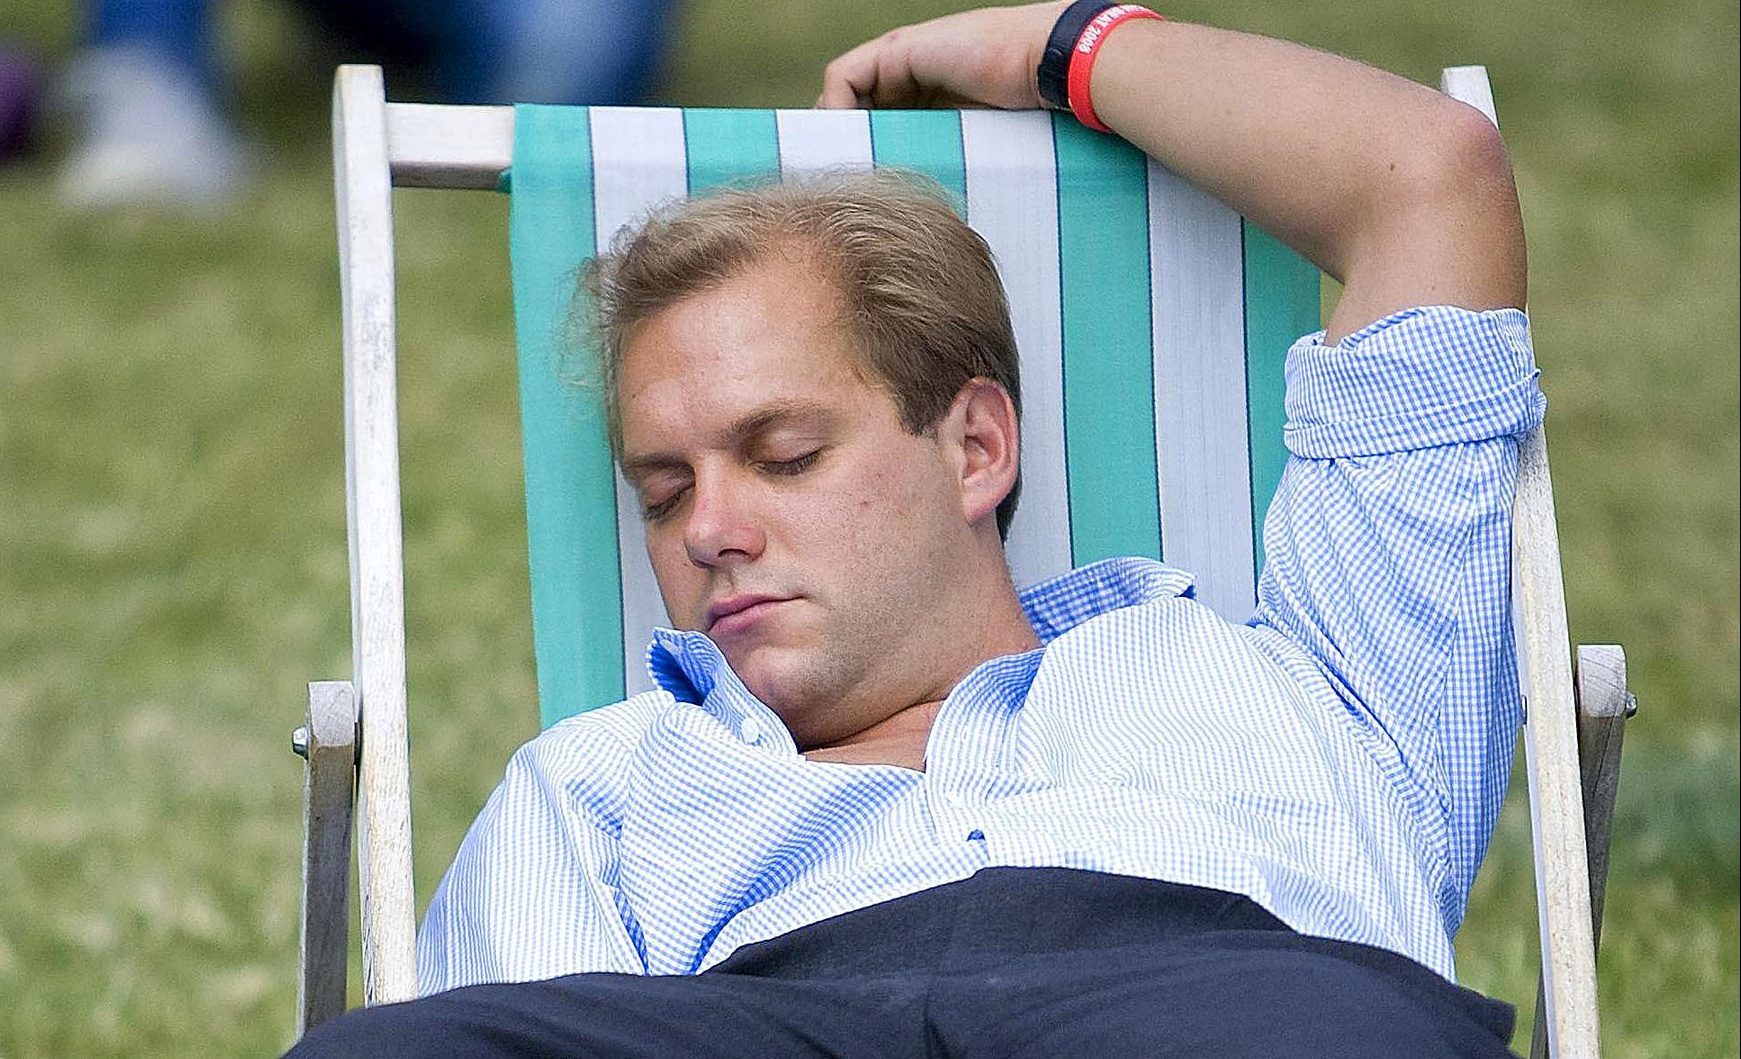 Scientists have discovered a surprising link between taking short naps and happiness. (Carl Court/PA Wire)